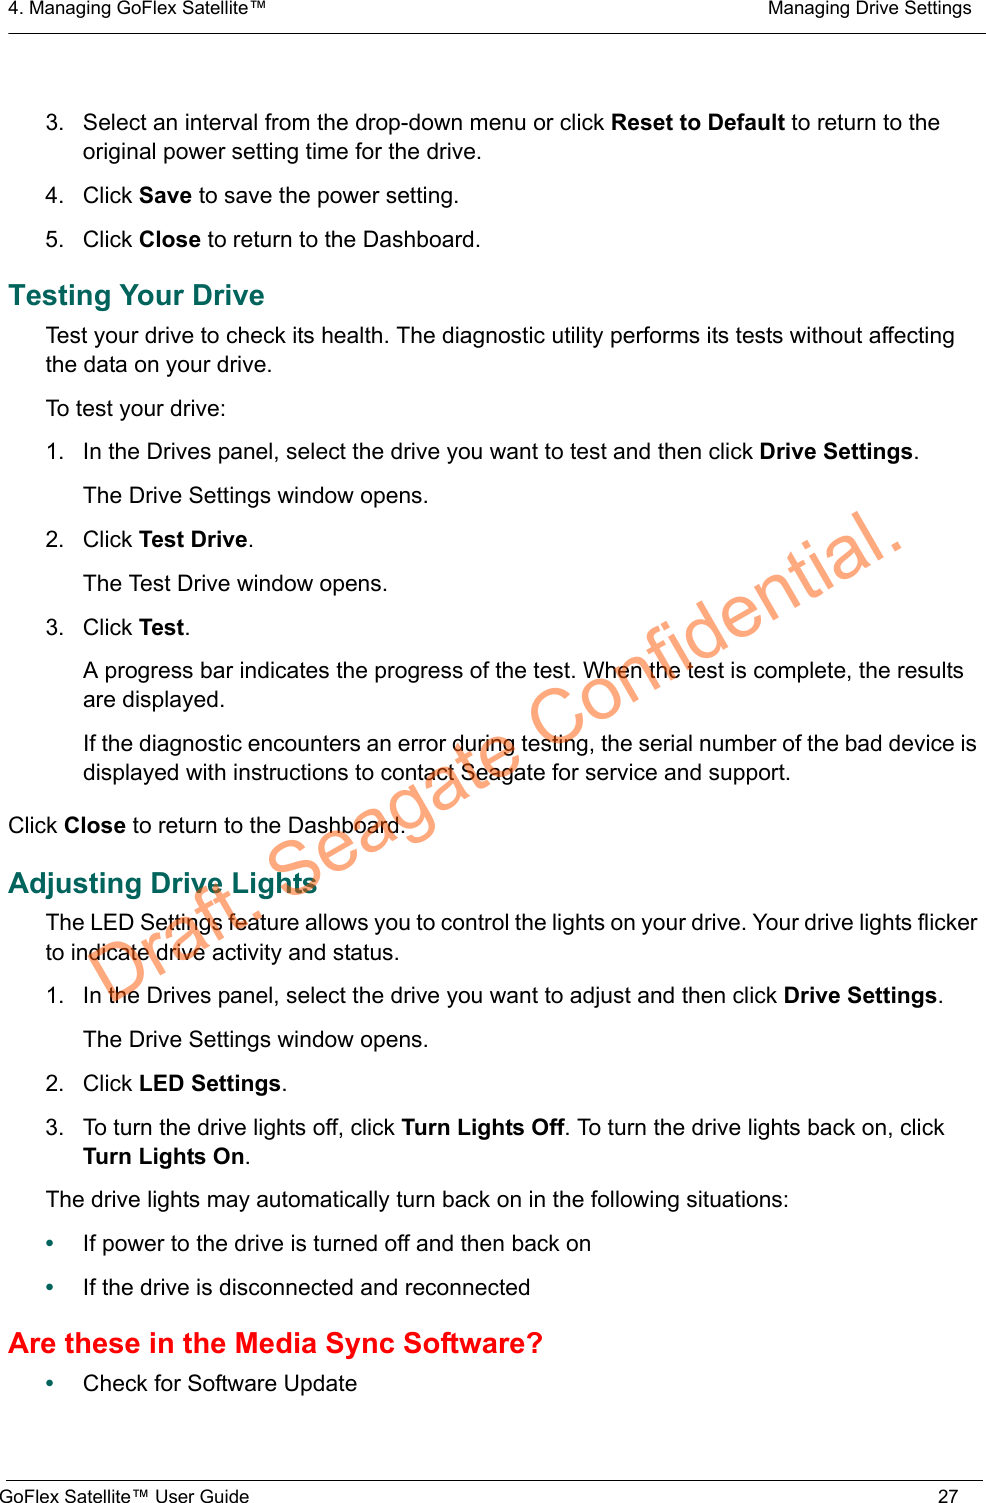 4. Managing GoFlex Satellite™  Managing Drive SettingsGoFlex Satellite™ User Guide 273. Select an interval from the drop-down menu or click Reset to Default to return to the original power setting time for the drive.4. Click Save to save the power setting.5. Click Close to return to the Dashboard.Testing Your DriveTest your drive to check its health. The diagnostic utility performs its tests without affecting the data on your drive.To test your drive:1. In the Drives panel, select the drive you want to test and then click Drive Settings.The Drive Settings window opens.2. Click Test Drive.The Test Drive window opens.3. Click Test.A progress bar indicates the progress of the test. When the test is complete, the results are displayed.If the diagnostic encounters an error during testing, the serial number of the bad device is displayed with instructions to contact Seagate for service and support.Click Close to return to the Dashboard.Adjusting Drive LightsThe LED Settings feature allows you to control the lights on your drive. Your drive lights flicker to indicate drive activity and status.1. In the Drives panel, select the drive you want to adjust and then click Drive Settings.The Drive Settings window opens.2. Click LED Settings.3. To turn the drive lights off, click Turn Lights Off. To turn the drive lights back on, click Turn Lights On.The drive lights may automatically turn back on in the following situations:•If power to the drive is turned off and then back on•If the drive is disconnected and reconnectedAre these in the Media Sync Software?•Check for Software UpdateDraft. Seagate Confidential.